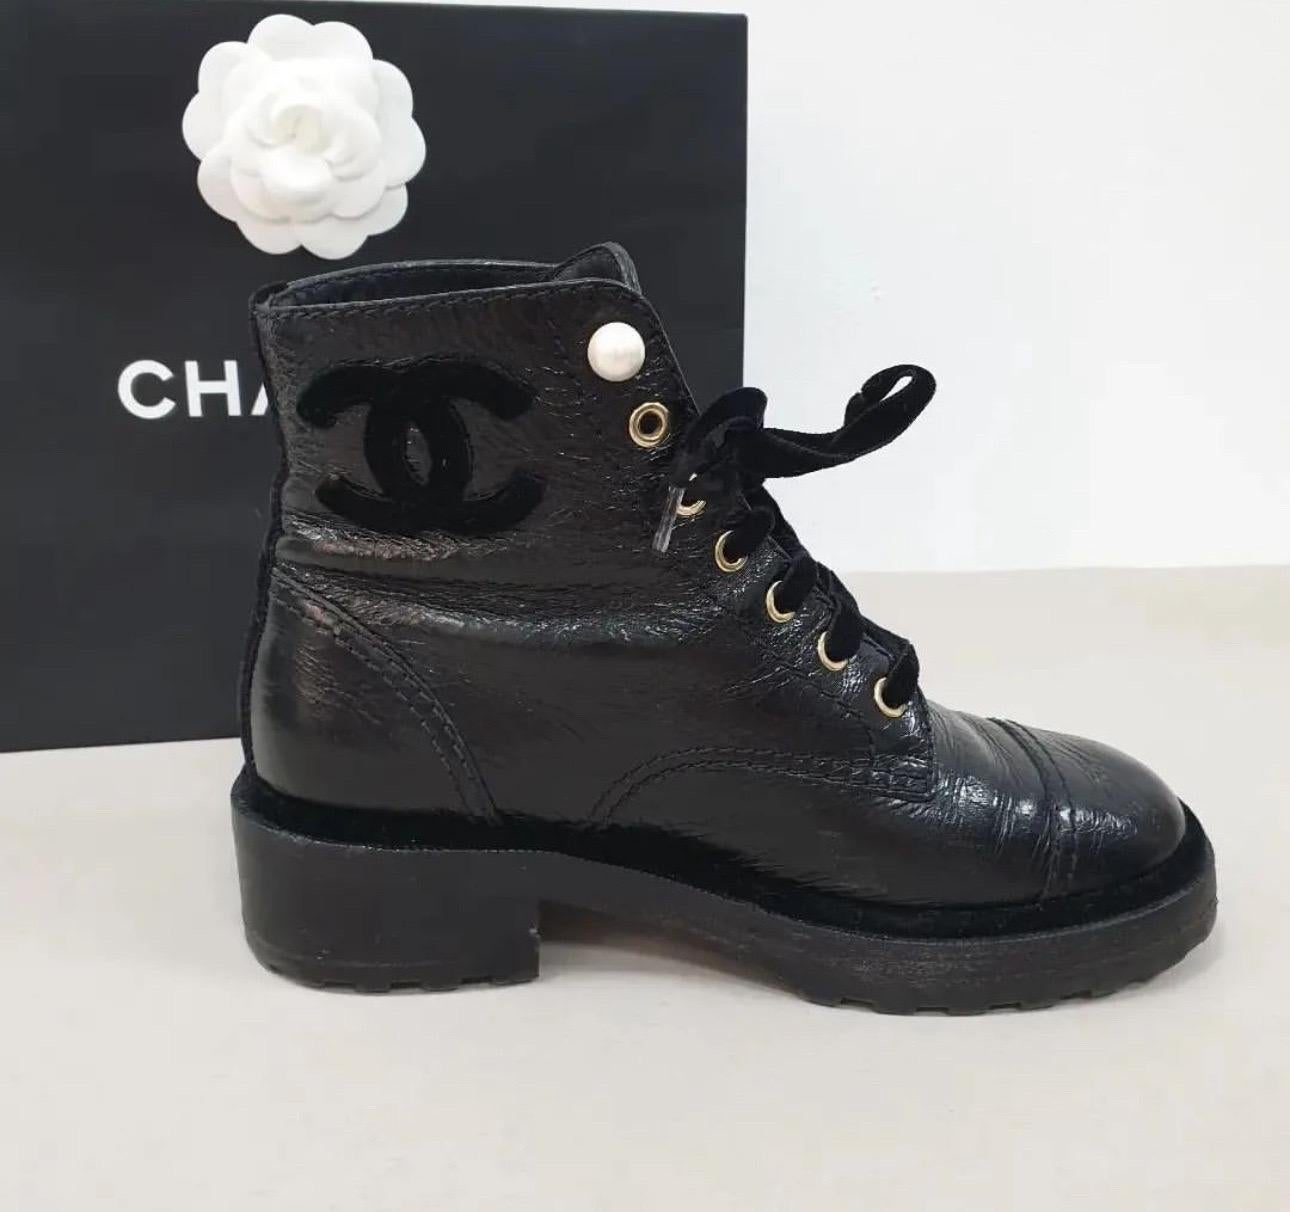 Chanel Pearl Embellished Crackled Calfskin Leather Boots In Good Condition For Sale In Krakow, PL